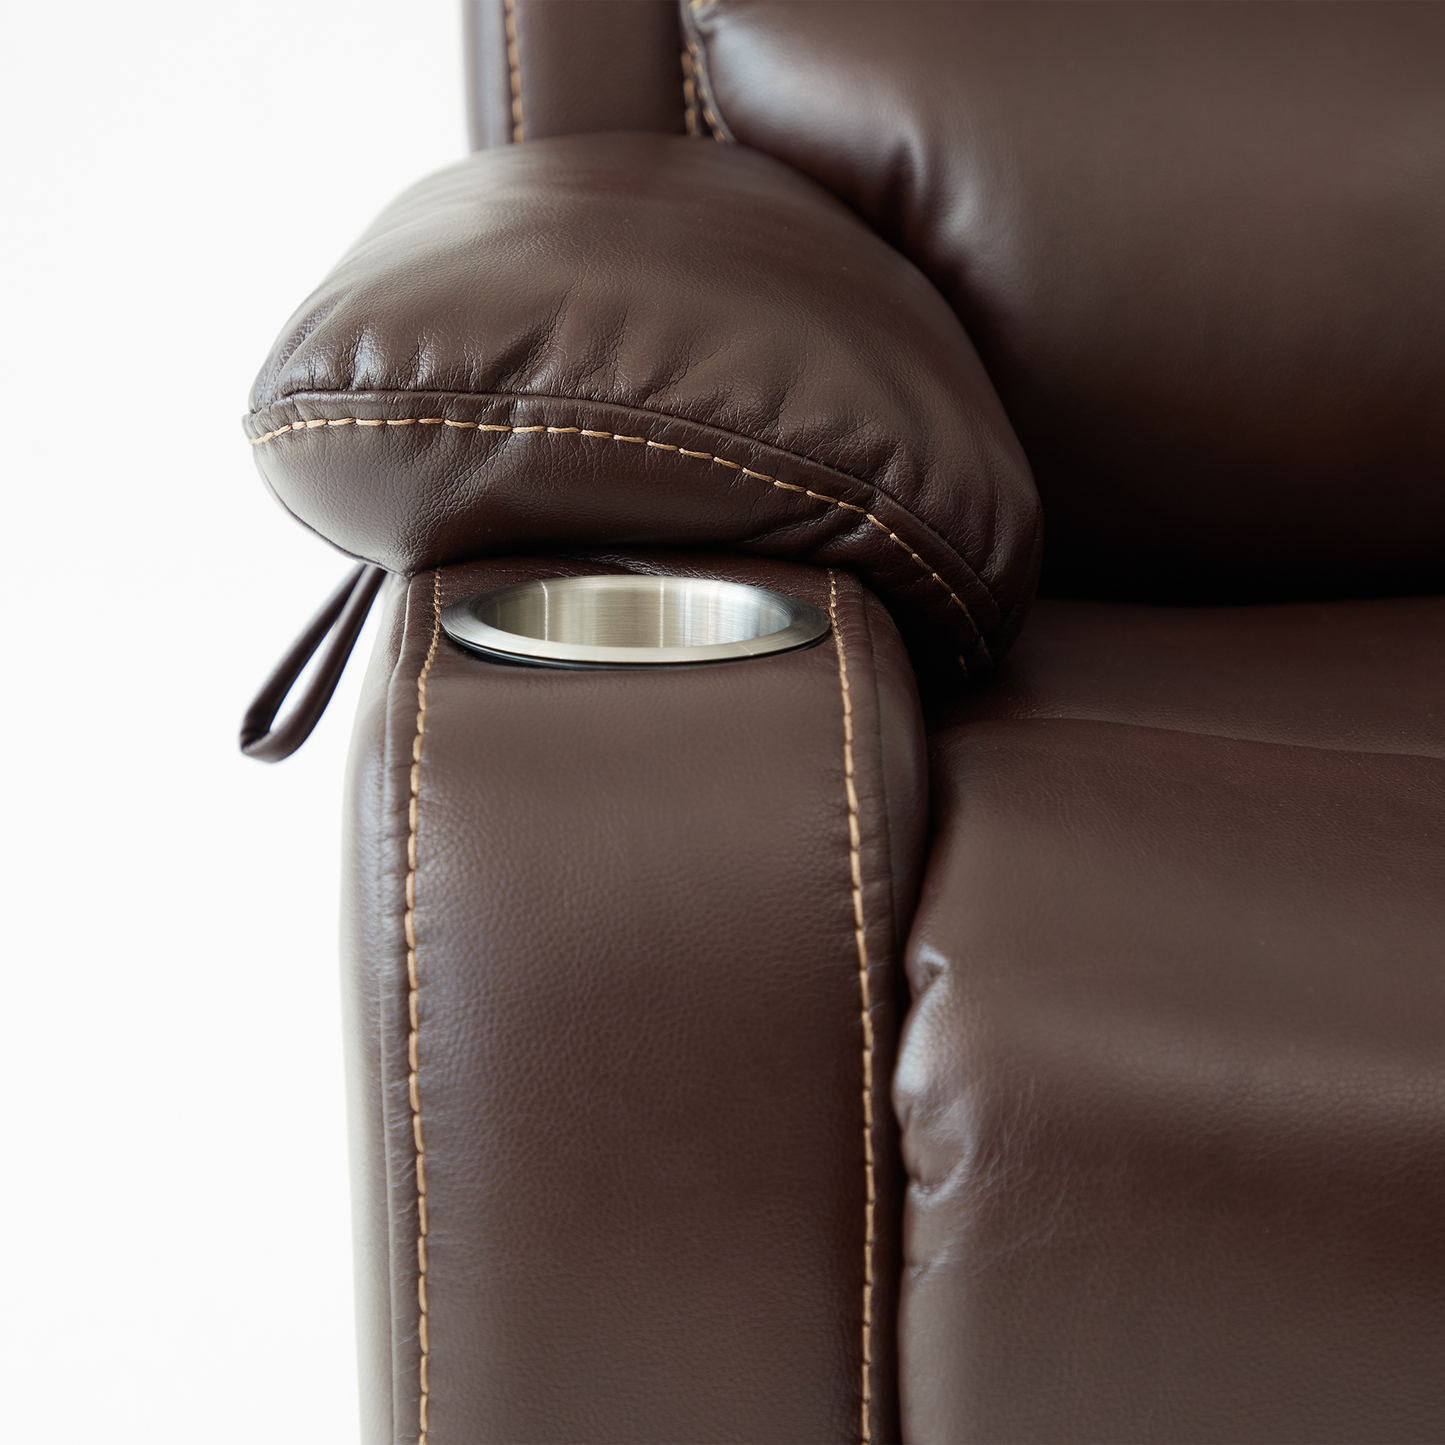 Lay Flat Recliner With Heating Massage And Cup Holder